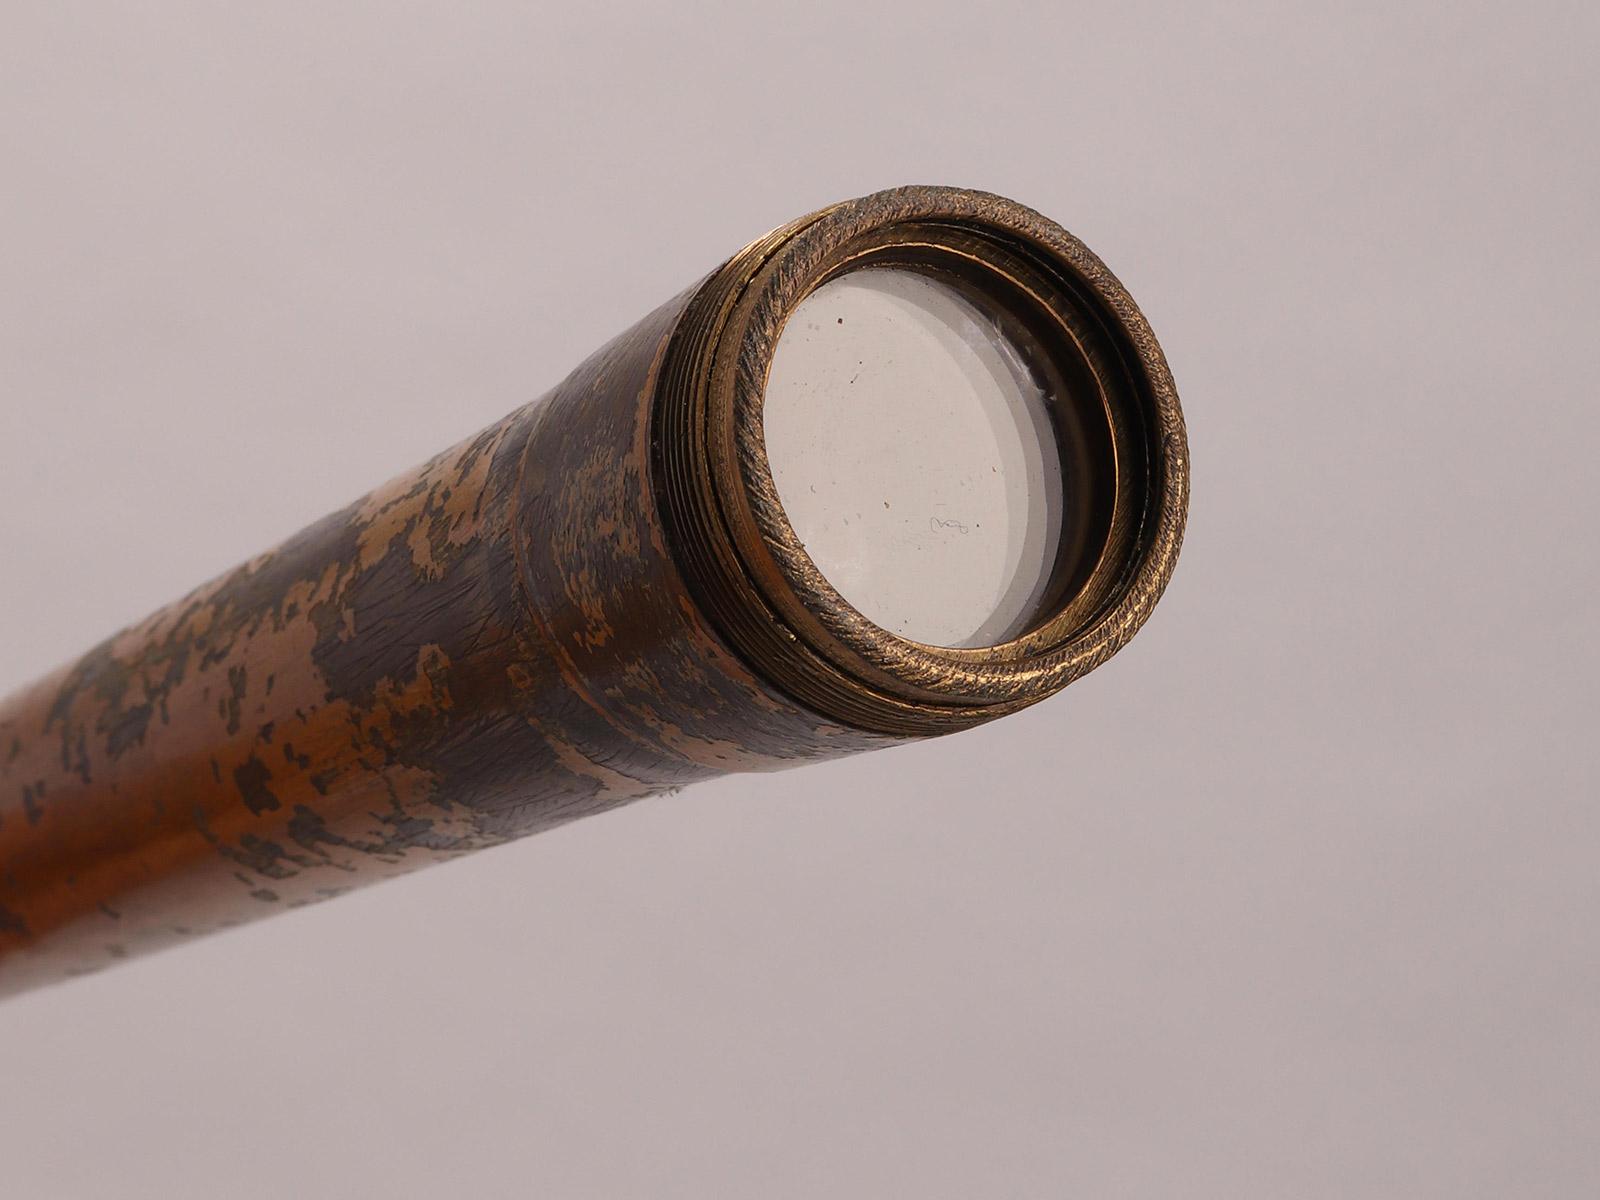 English System walking stick, a telescope, England 1880.  For Sale